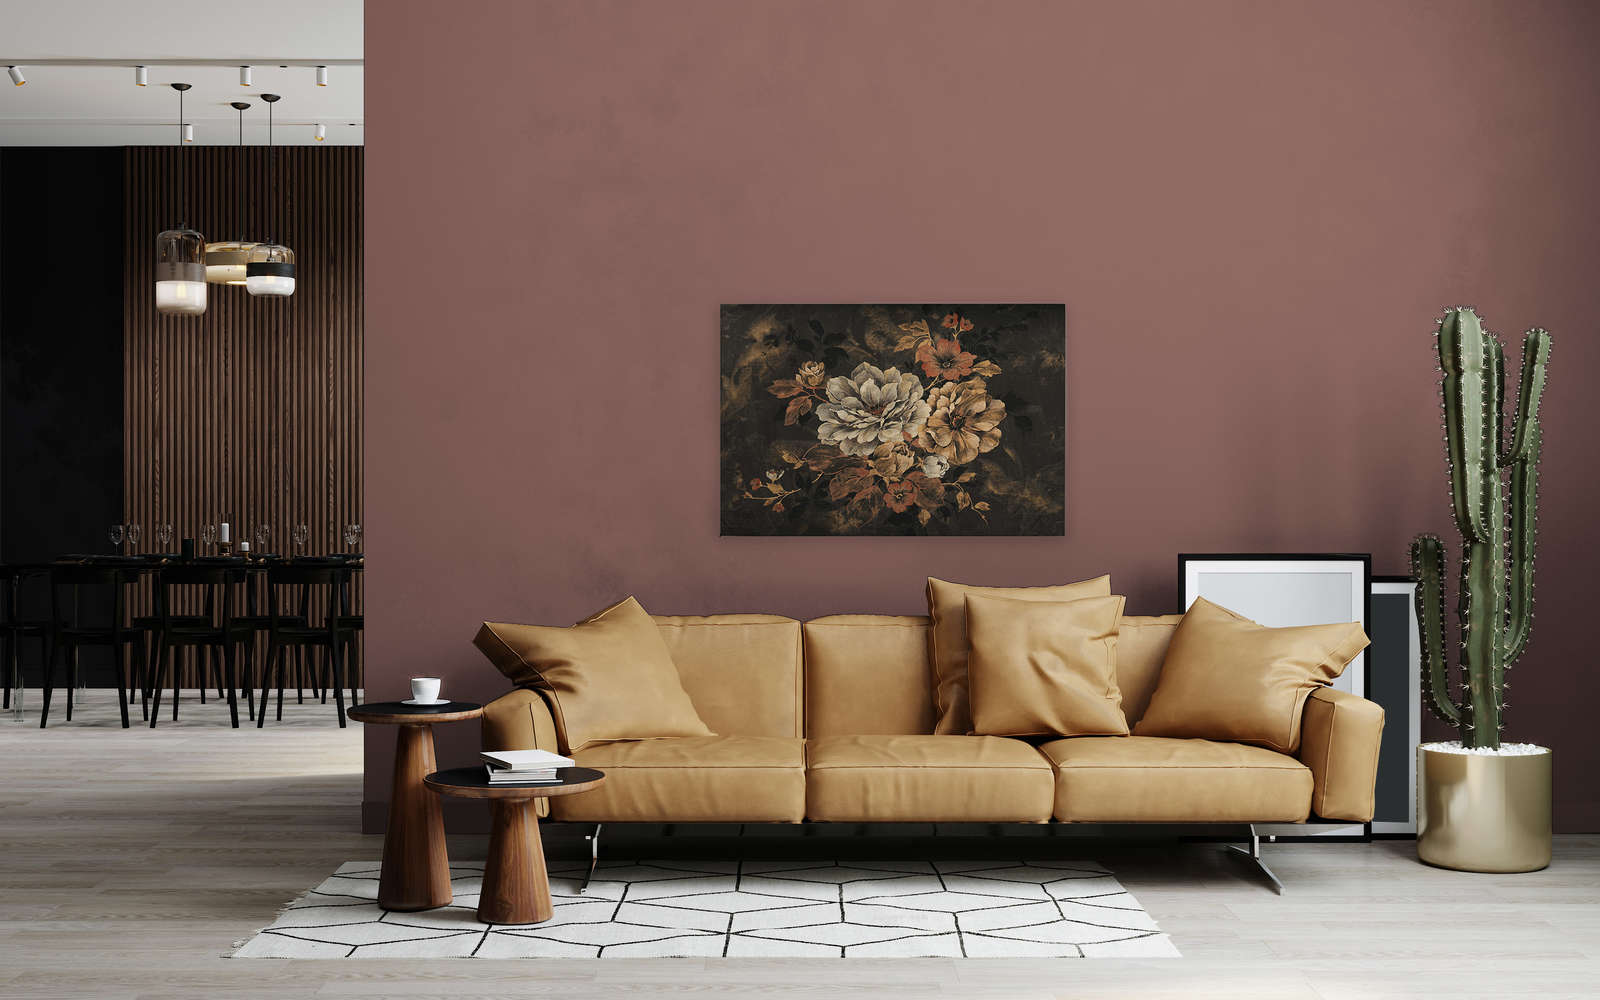             Canvas painting flower design, oil painting in vintage look - 1.20 m x 0.80 m
        